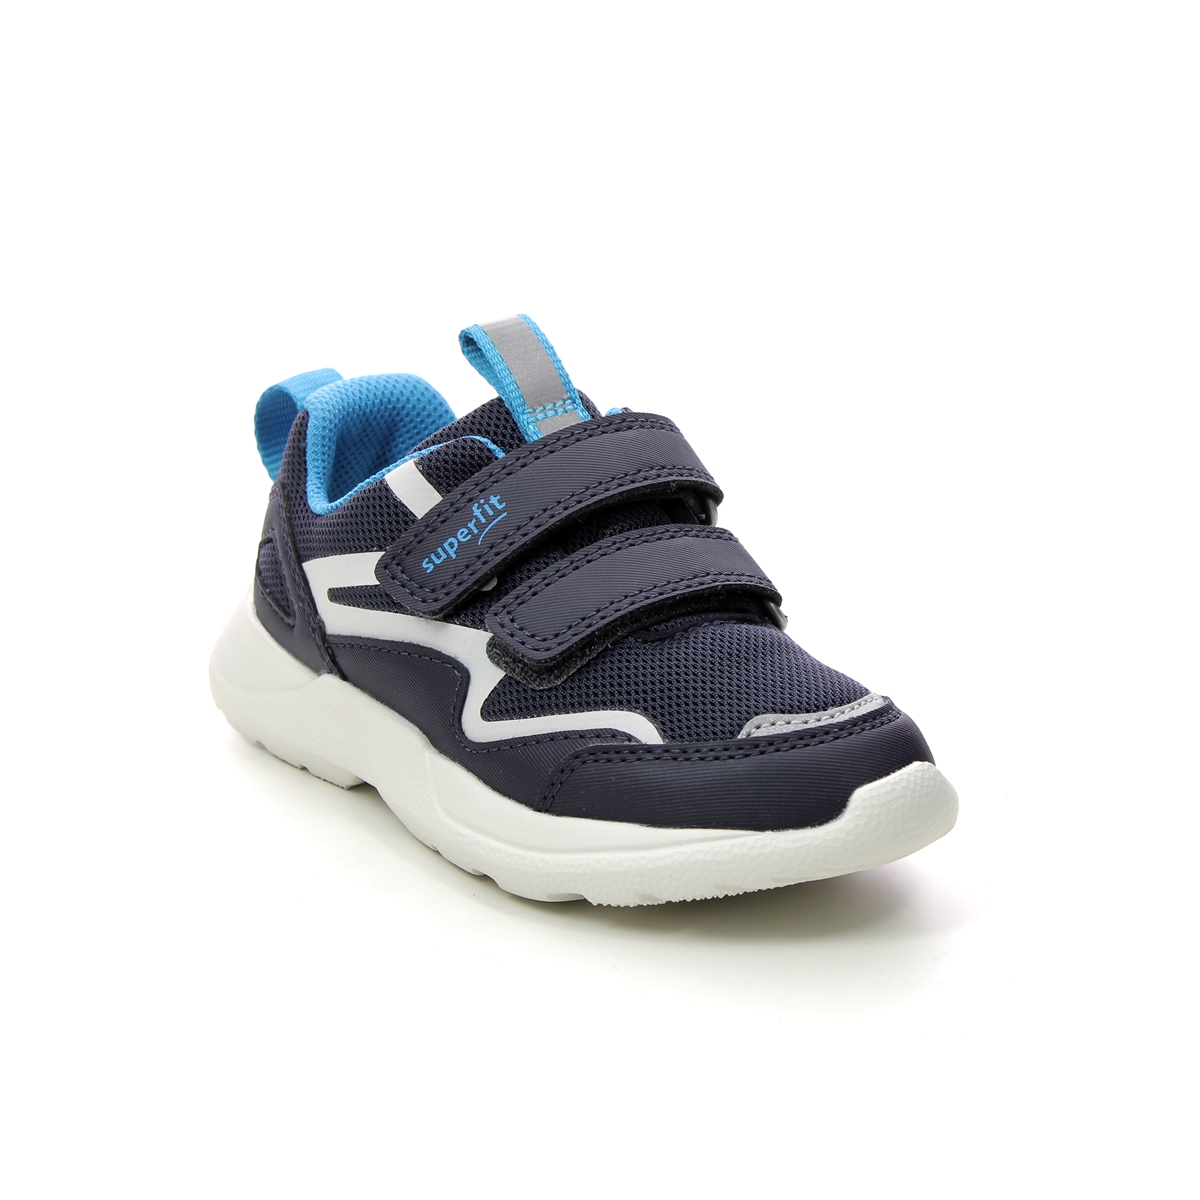 Superfit Rush Mini Navy Kids Trainers 1006206-8000 In Size 26 In Plain Navy For kids